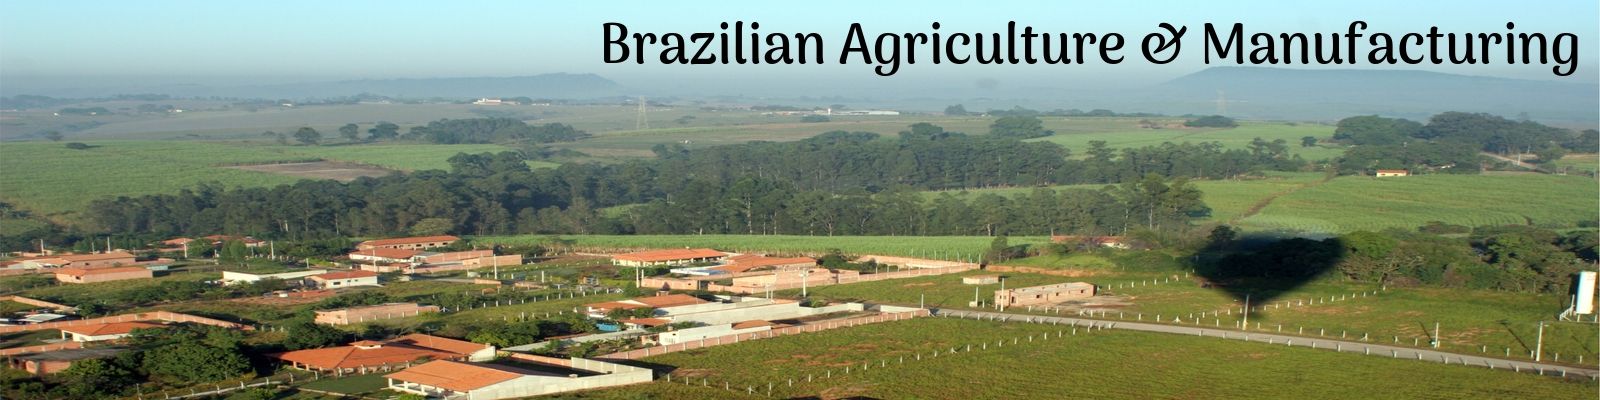 Brazilian Agriculture and Manufacturing